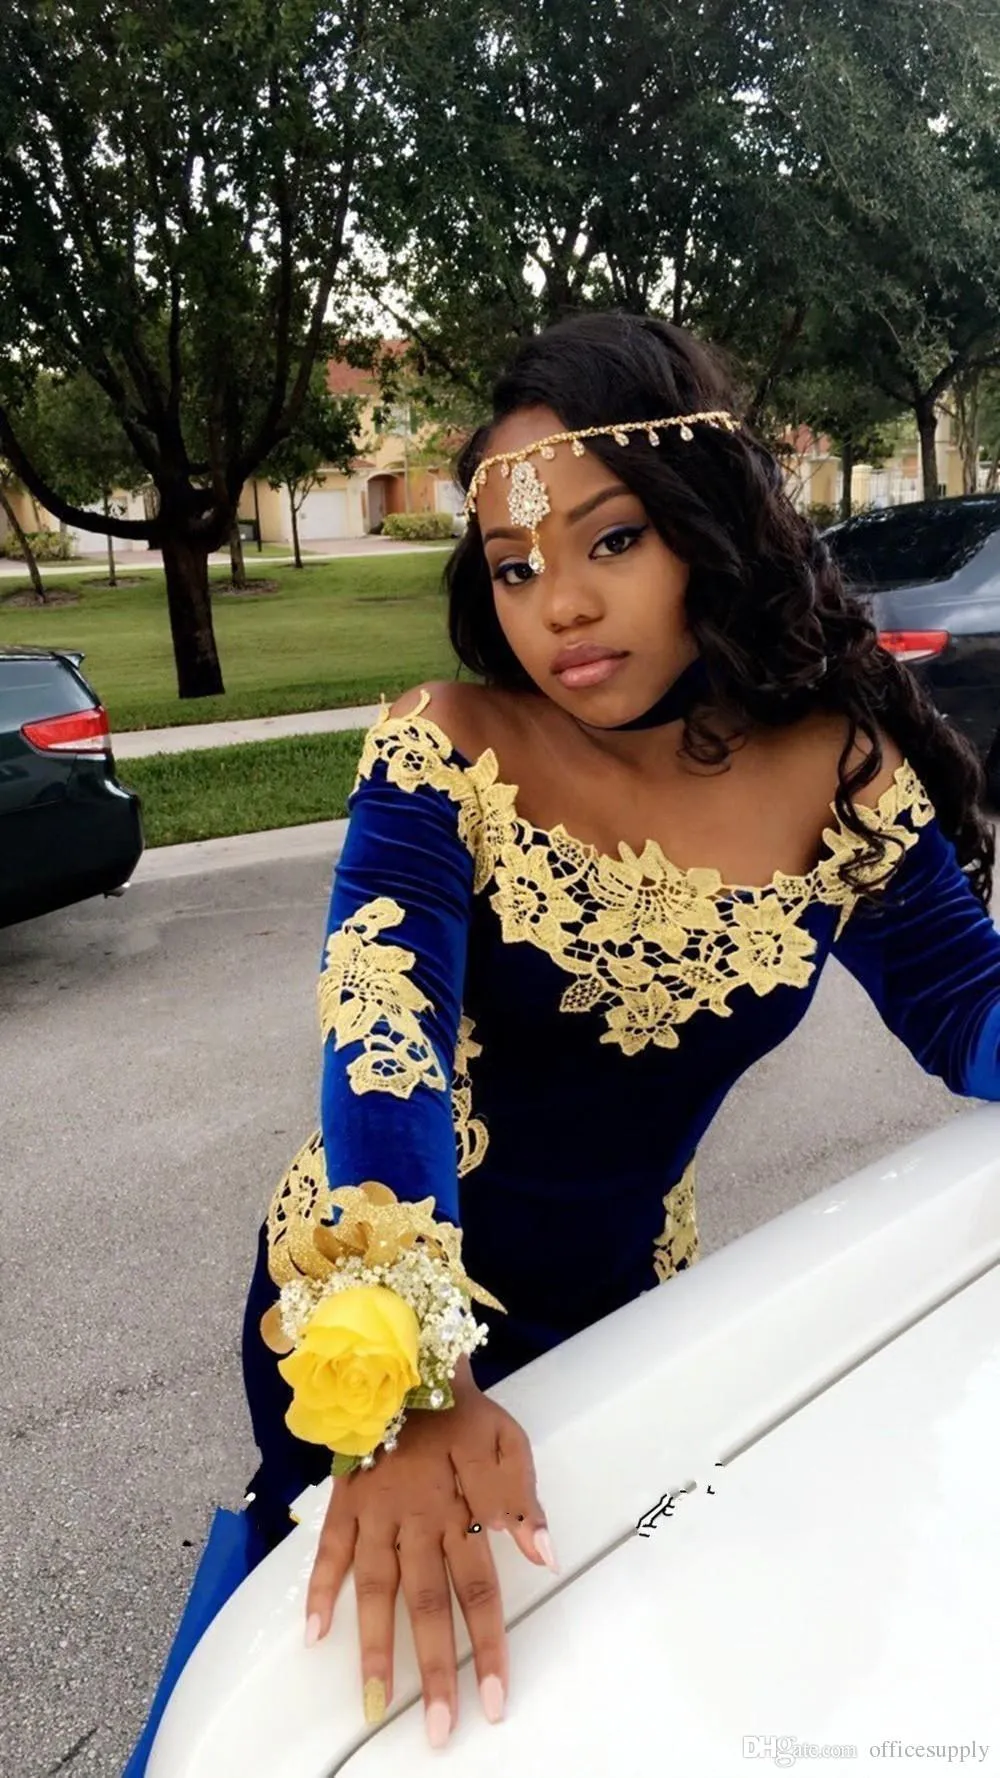 2019 New South Africa Long Sleeves Prom Dresses Elegant Boat Neckline Floor Length Mermaid Royal Blue Velvet Evening Gowns with Gold Lace